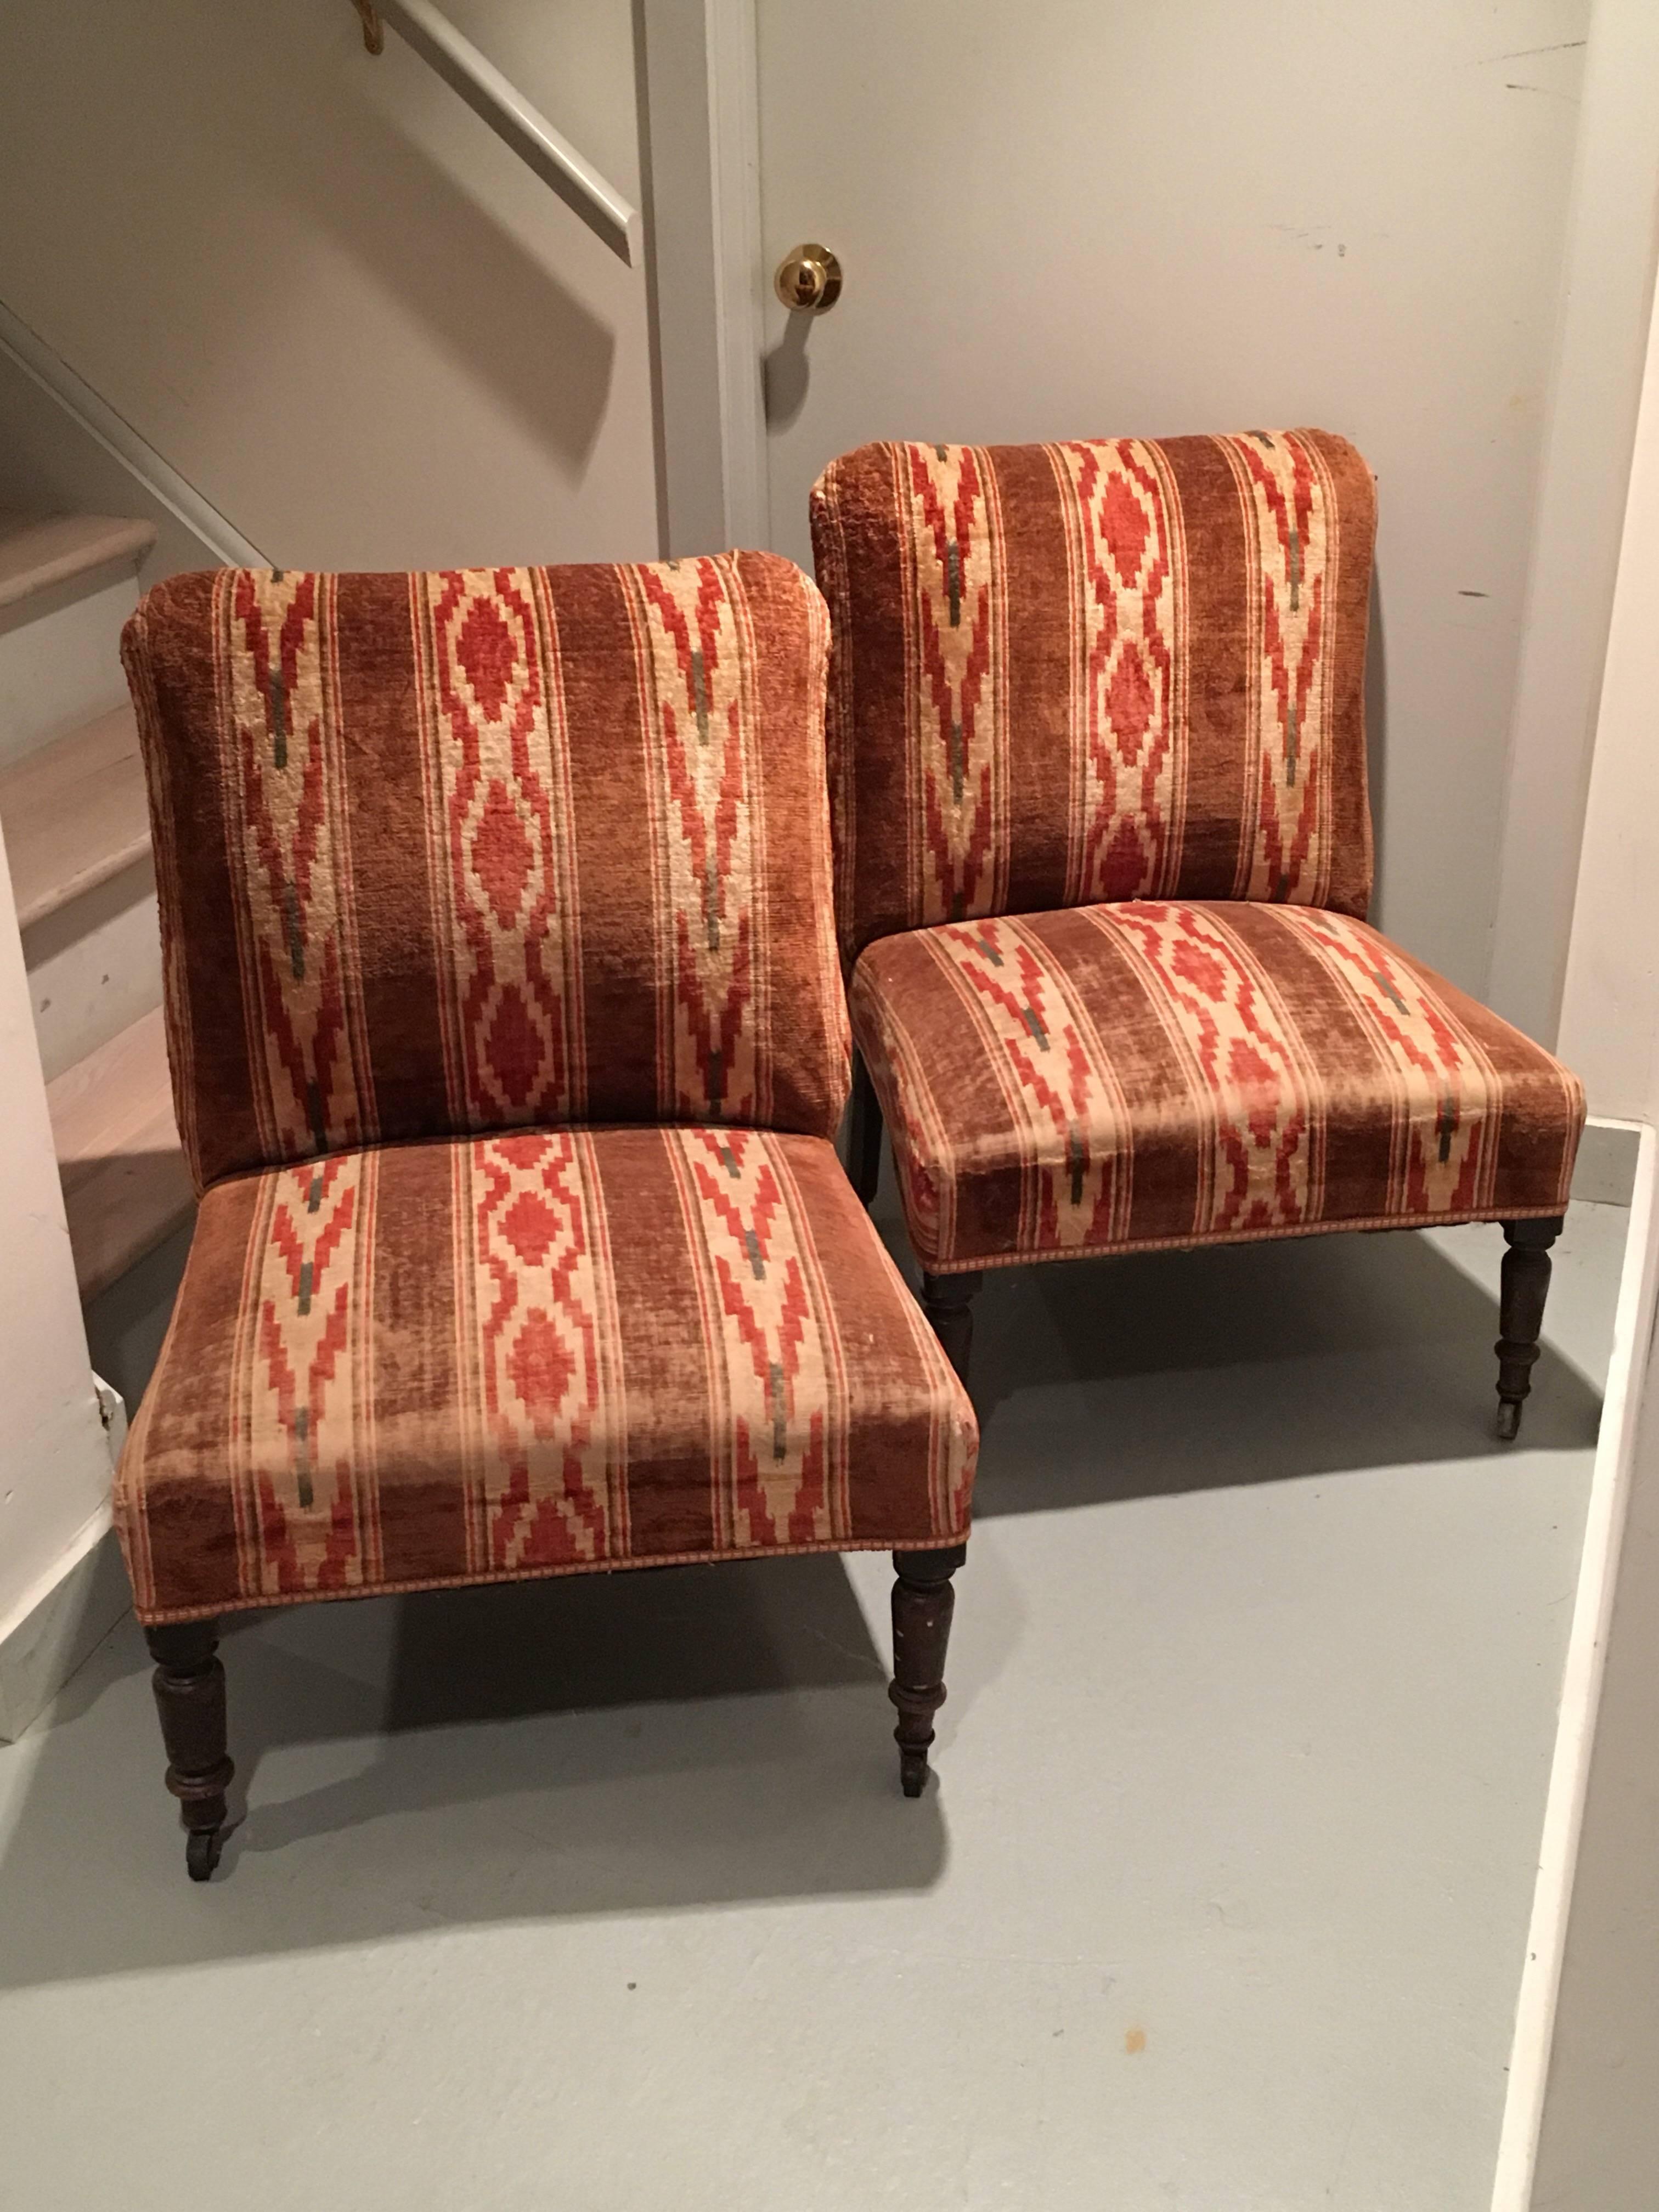 Pair of English velvet upholstered slipper chairs with rounded Turkish corners. Wear to the vintage velvet stripe on the seat edge. Great patina and look. Small tape trim applied around base perimeter. Legs on working original casters.